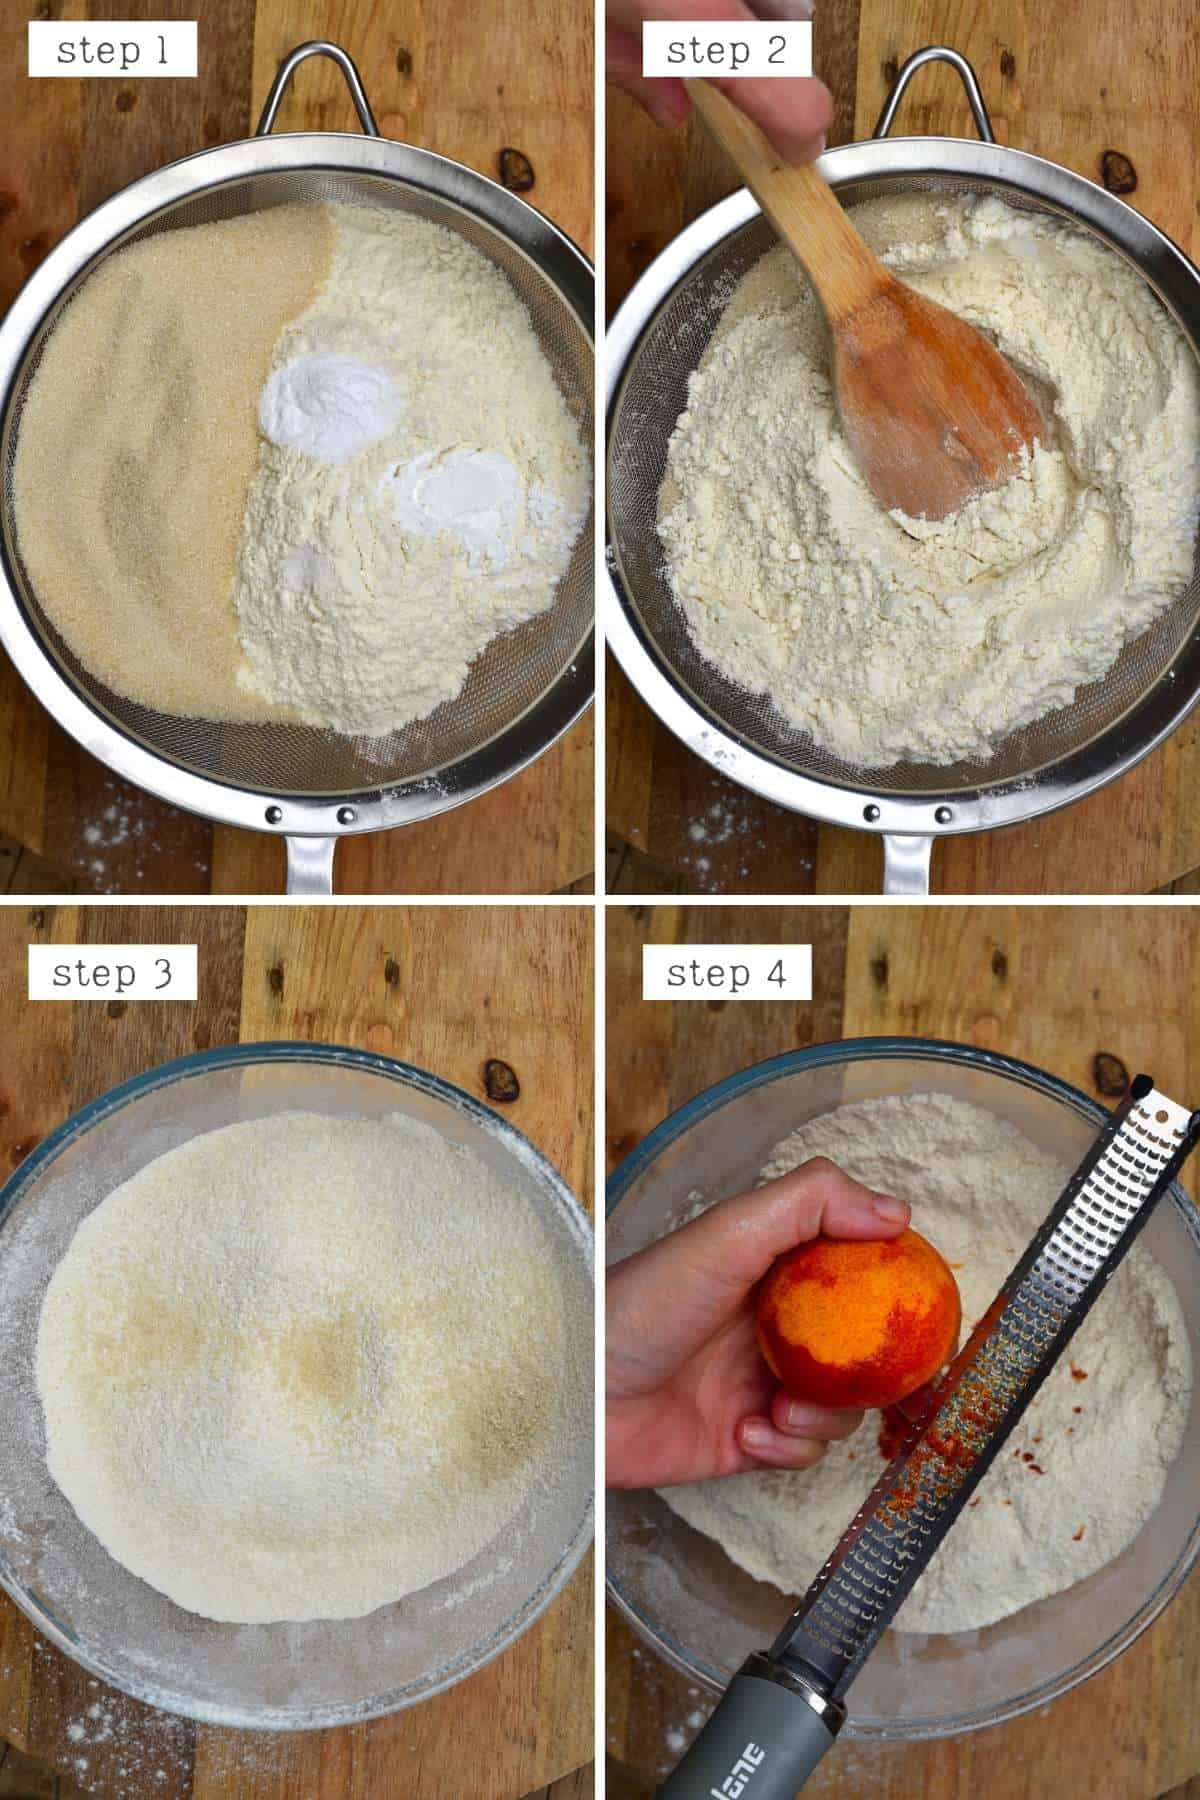 Steps for mixing dry ingredients for orange cake